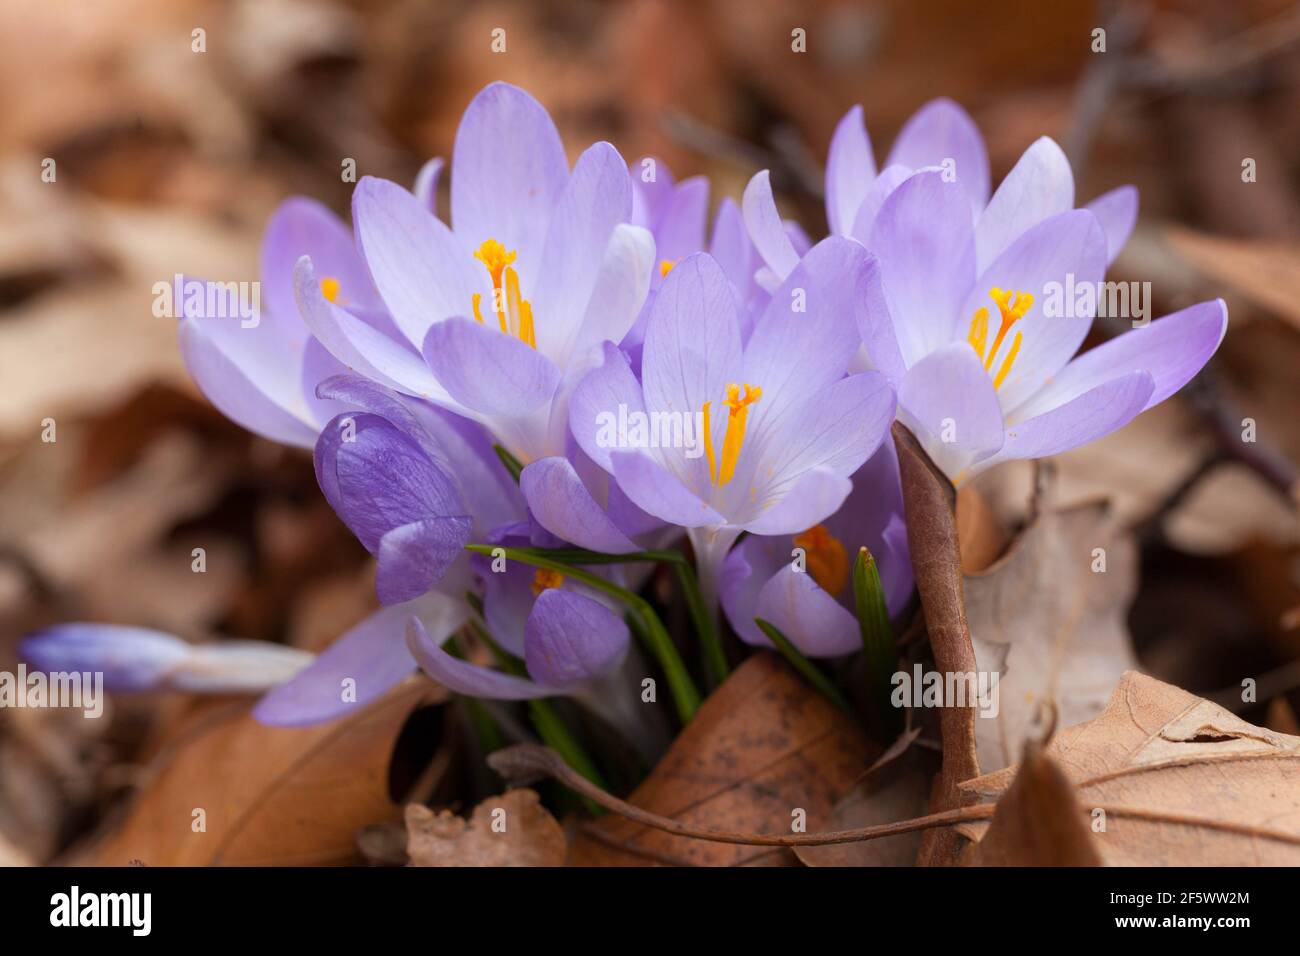 Spring crocuses First Spring flowers Growing up Leaves Clumps of Crocuses Flowering in March Early spring Flowers Pale blue Crocus Flower Blooming Stock Photo